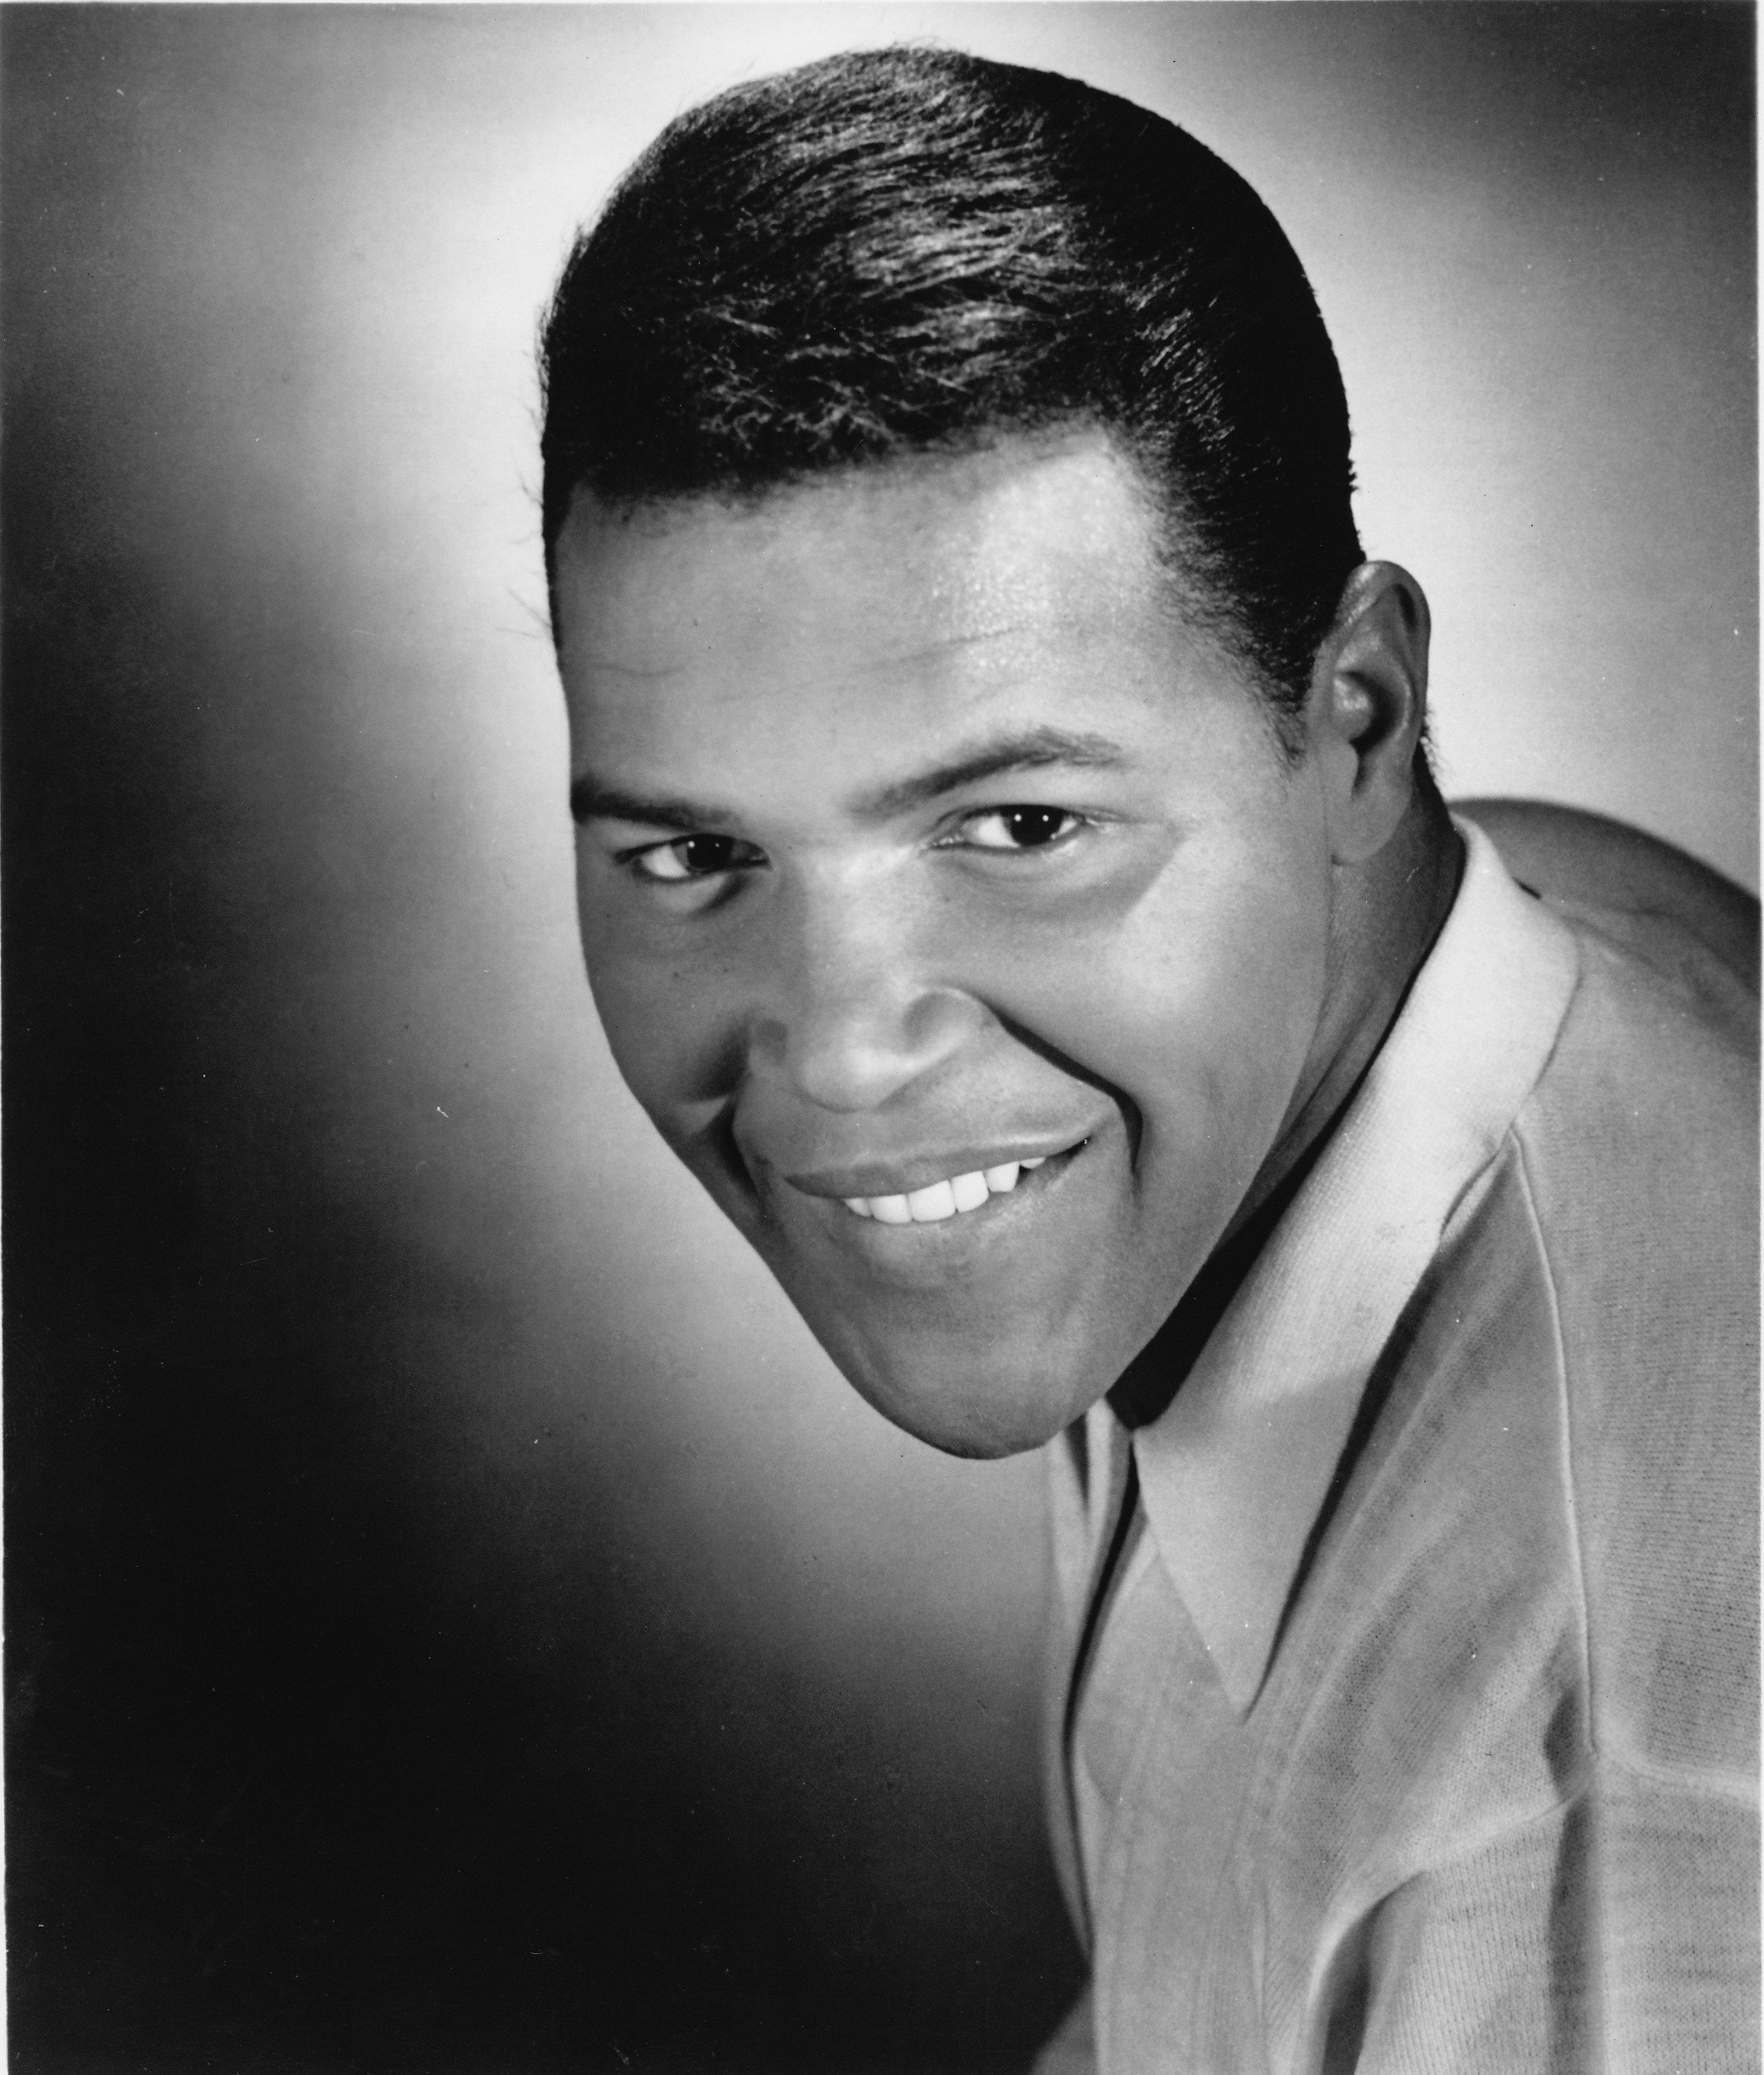 Chubby Checker in a studio portrait from 1961 in the United States. | Source: Getty Images